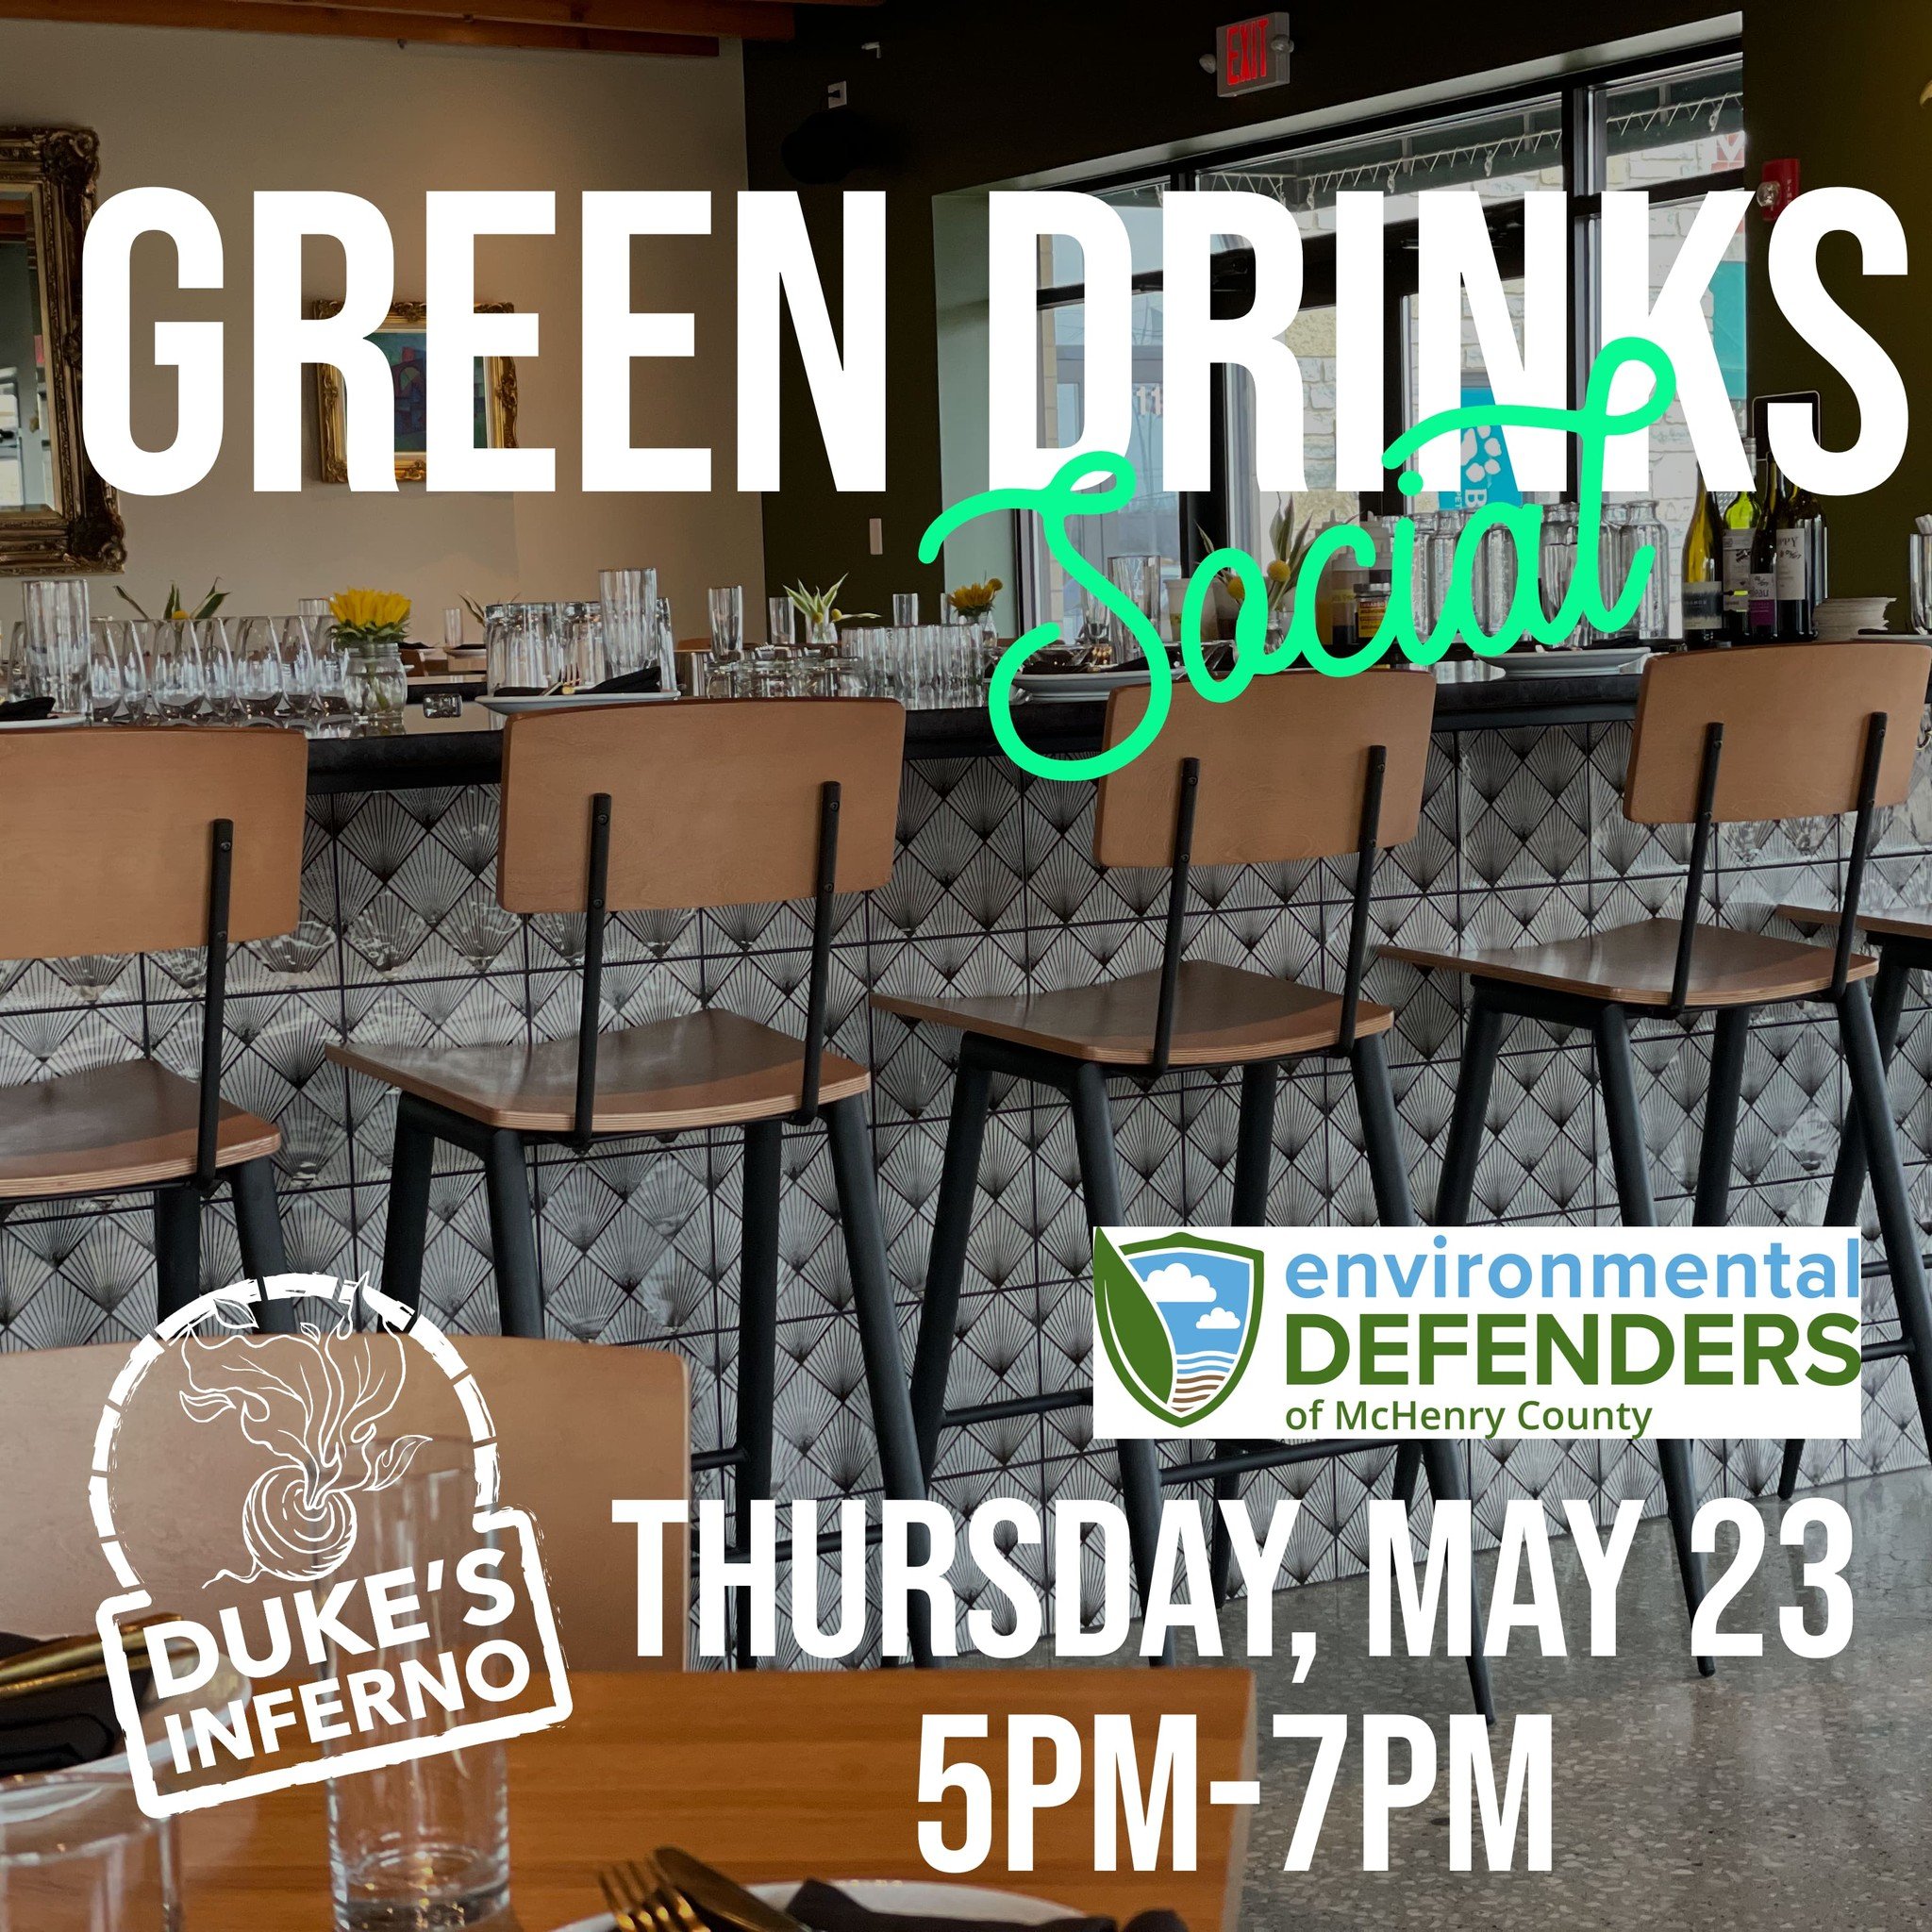 Join us, The Environmental Defenders of McHenry County and other green-minded individuals for half-priced cocktails, food, green networking and fun at Duke's Inferno in Woodstock. #thedukeabides